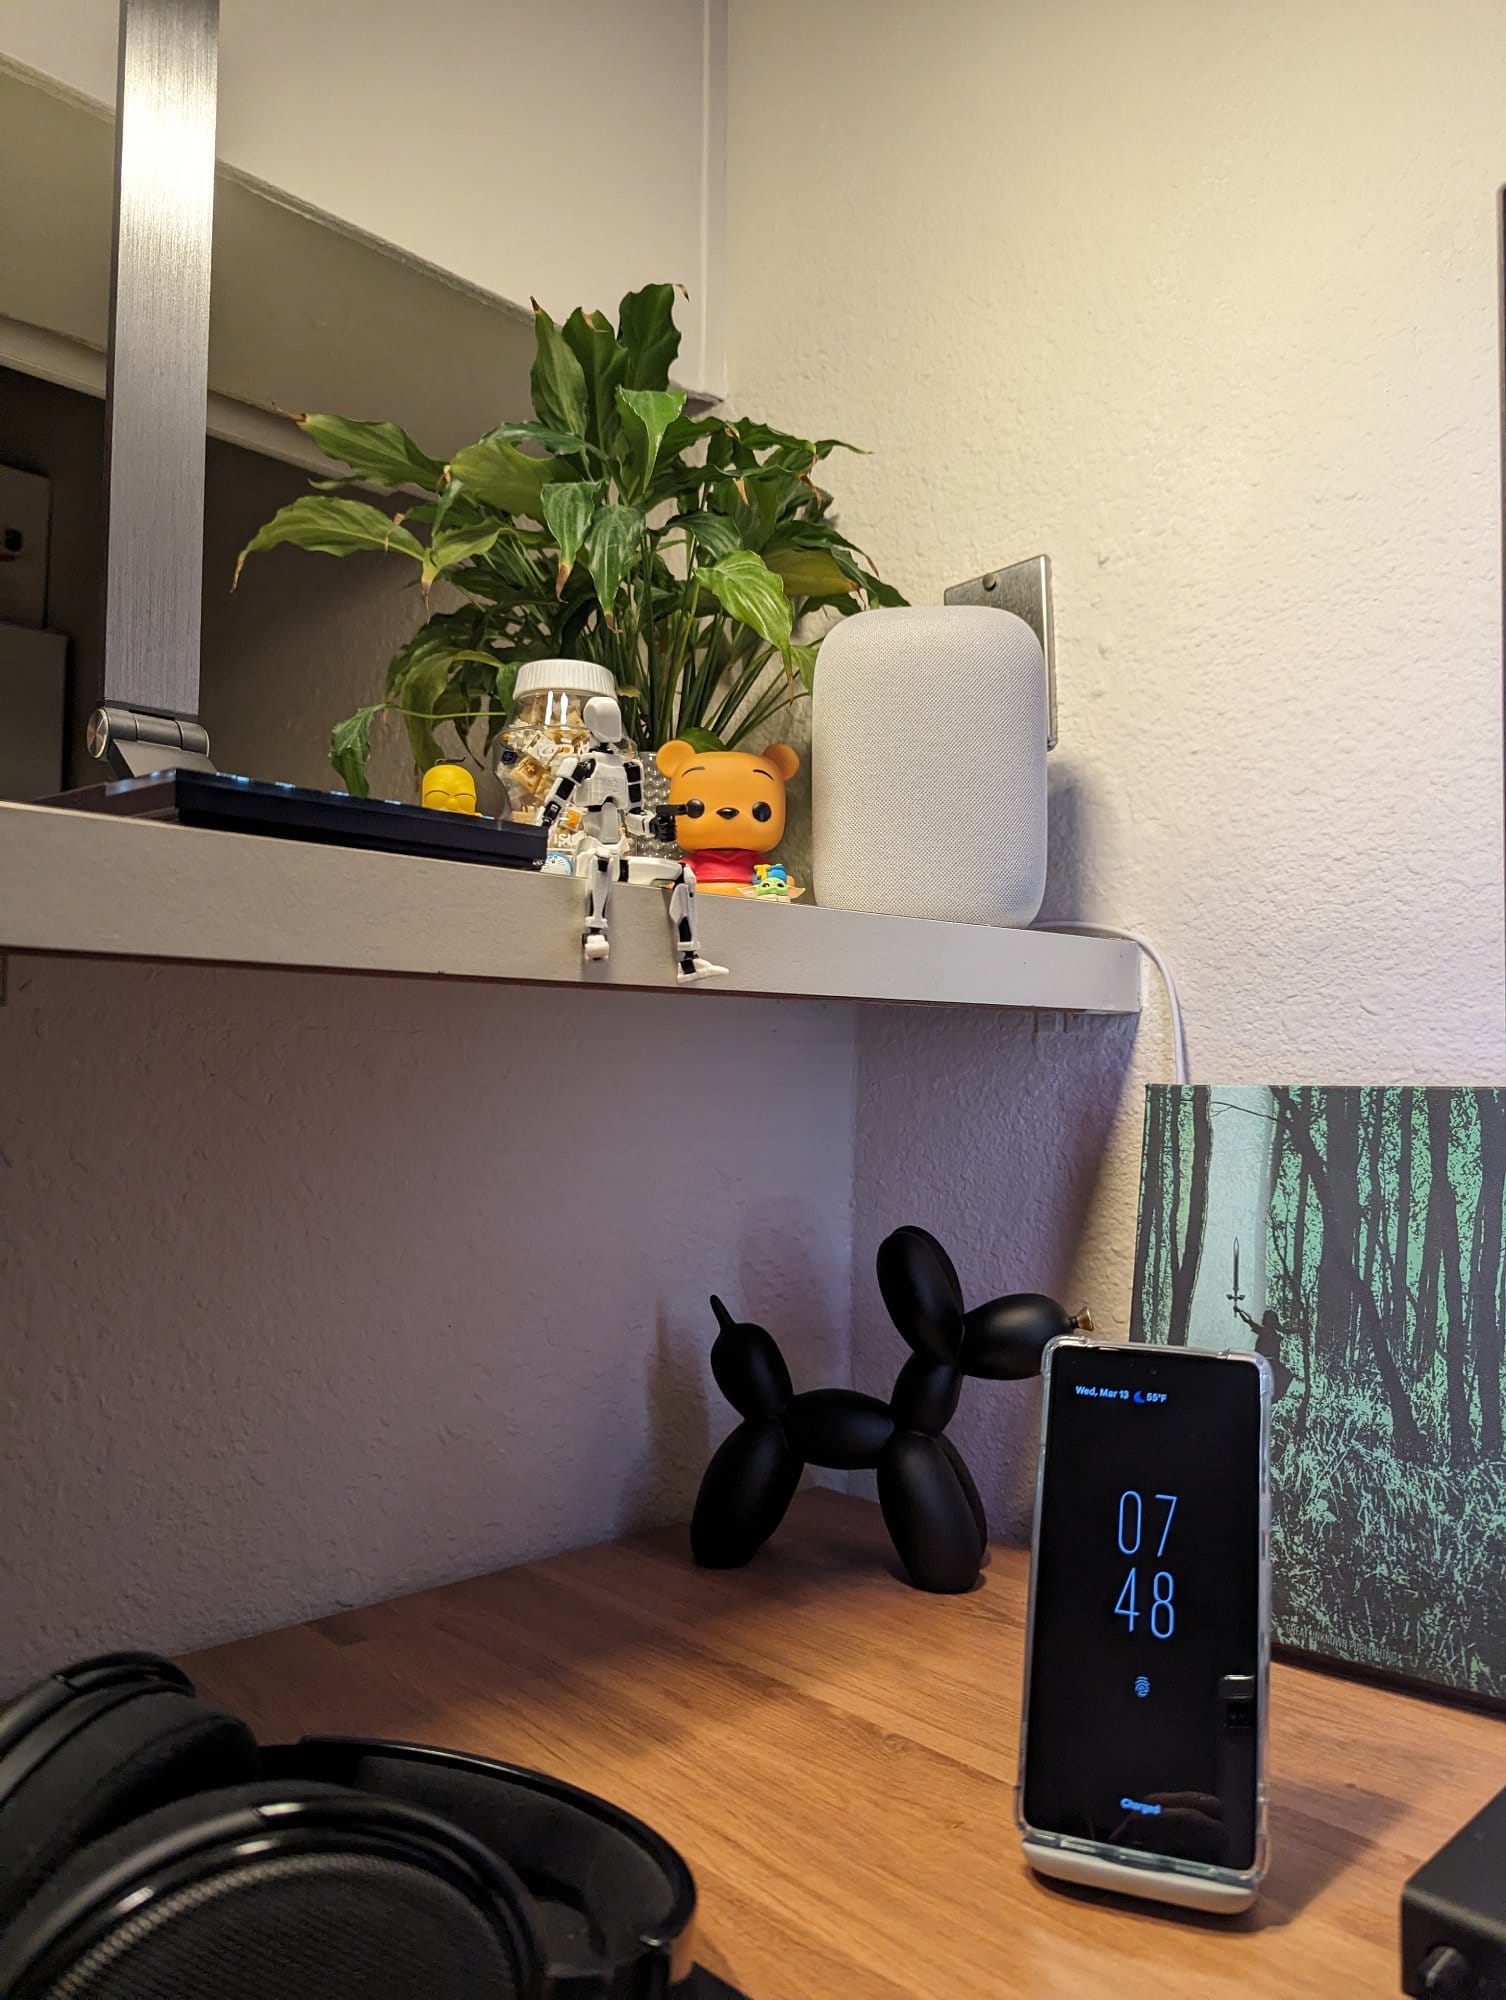 A shelf with various items including a plant, collectible figures, a speaker, and a smartphone displaying the time against a backdrop of a framed forest picture